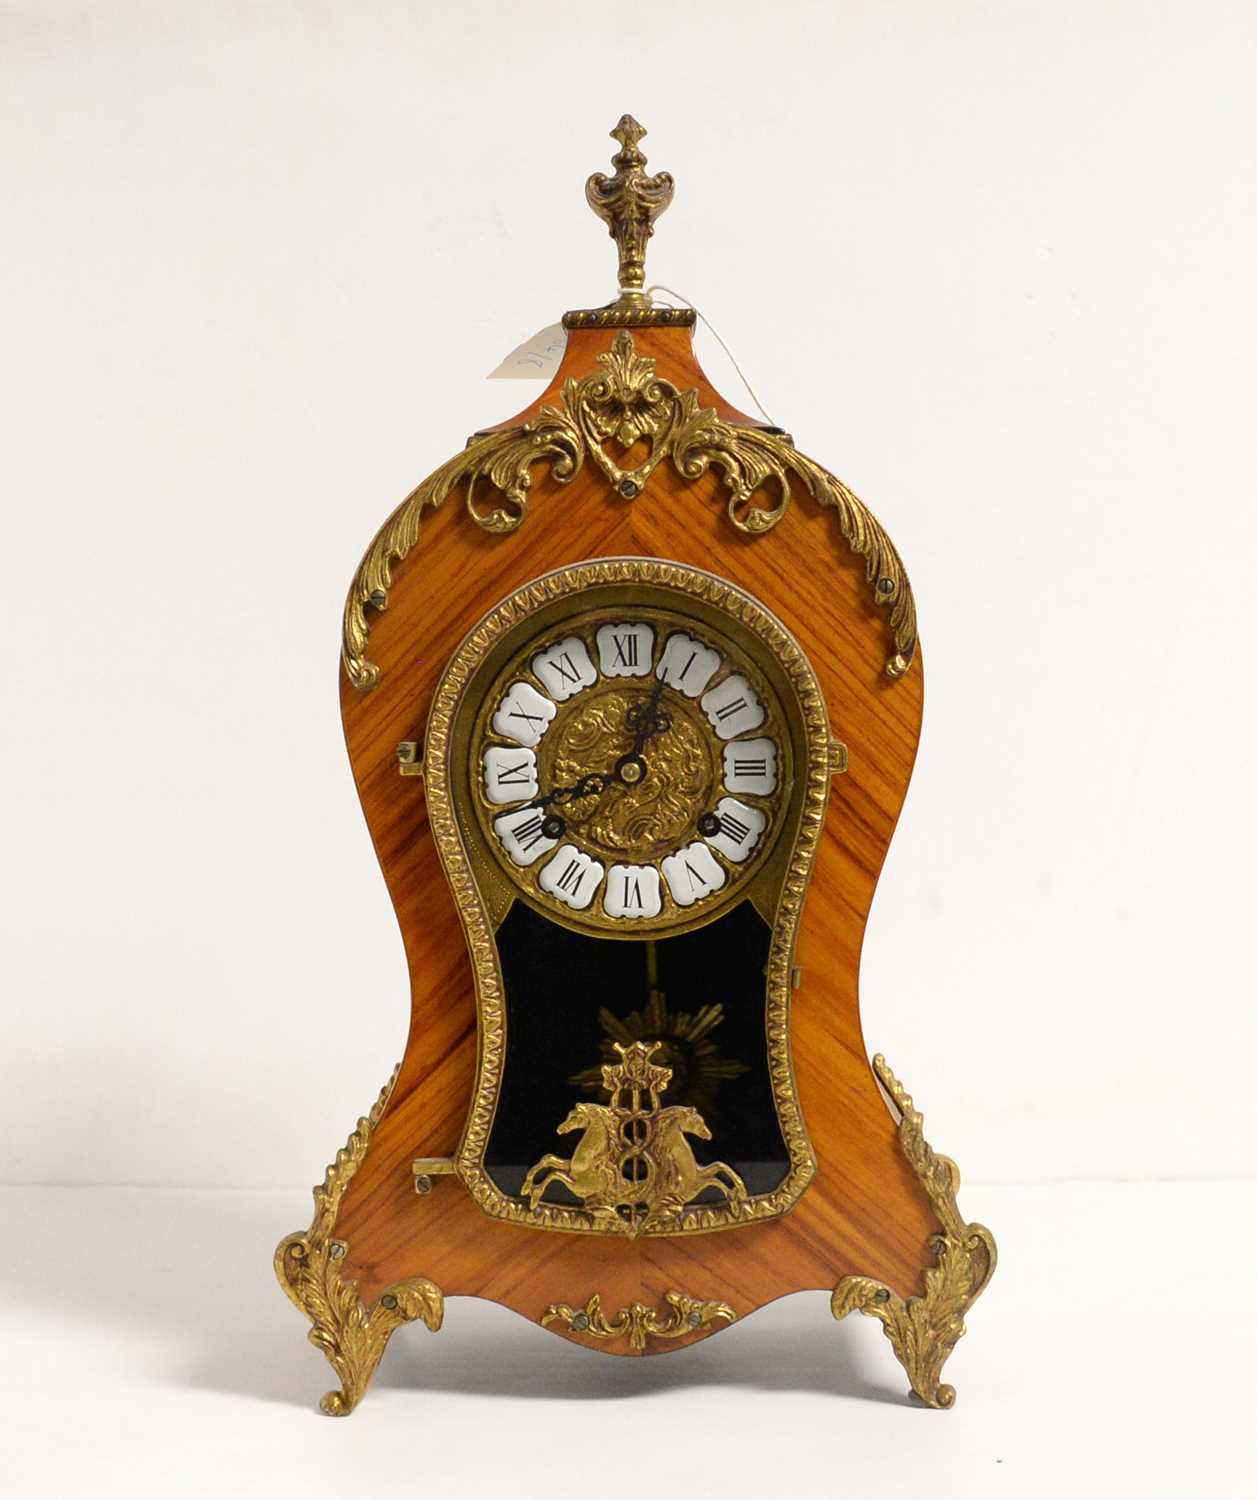 Lot 306 - A Continental Louis XIV-style gilt metal mounted mantle clock